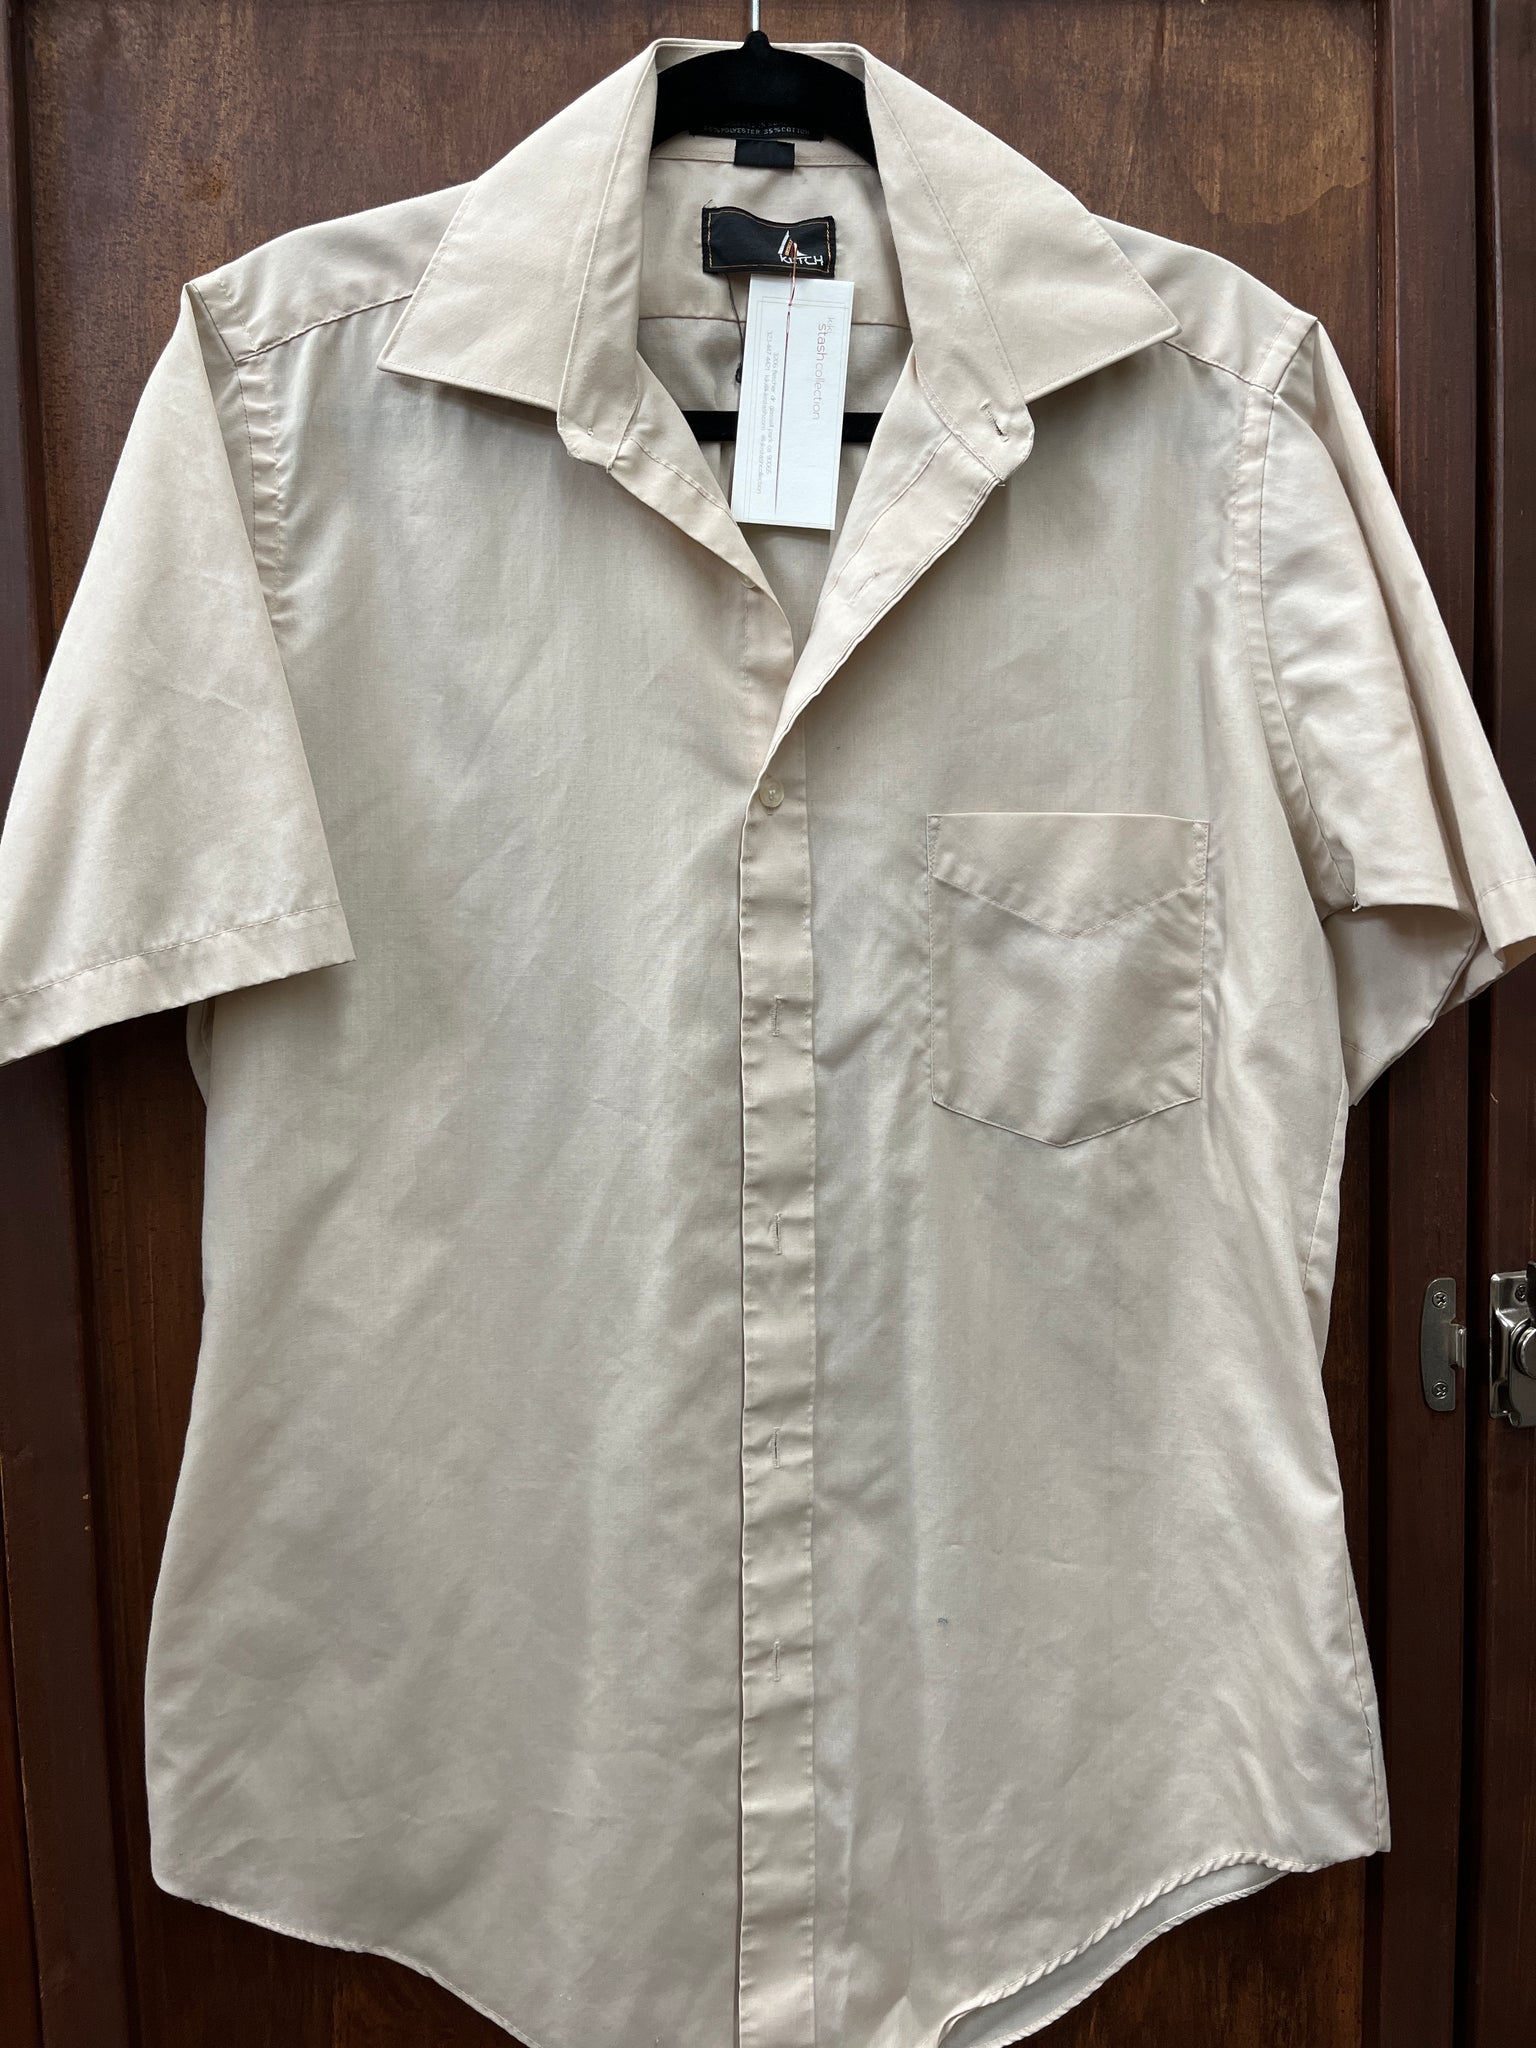 1960s MENS TOP- Ketch sand s/s